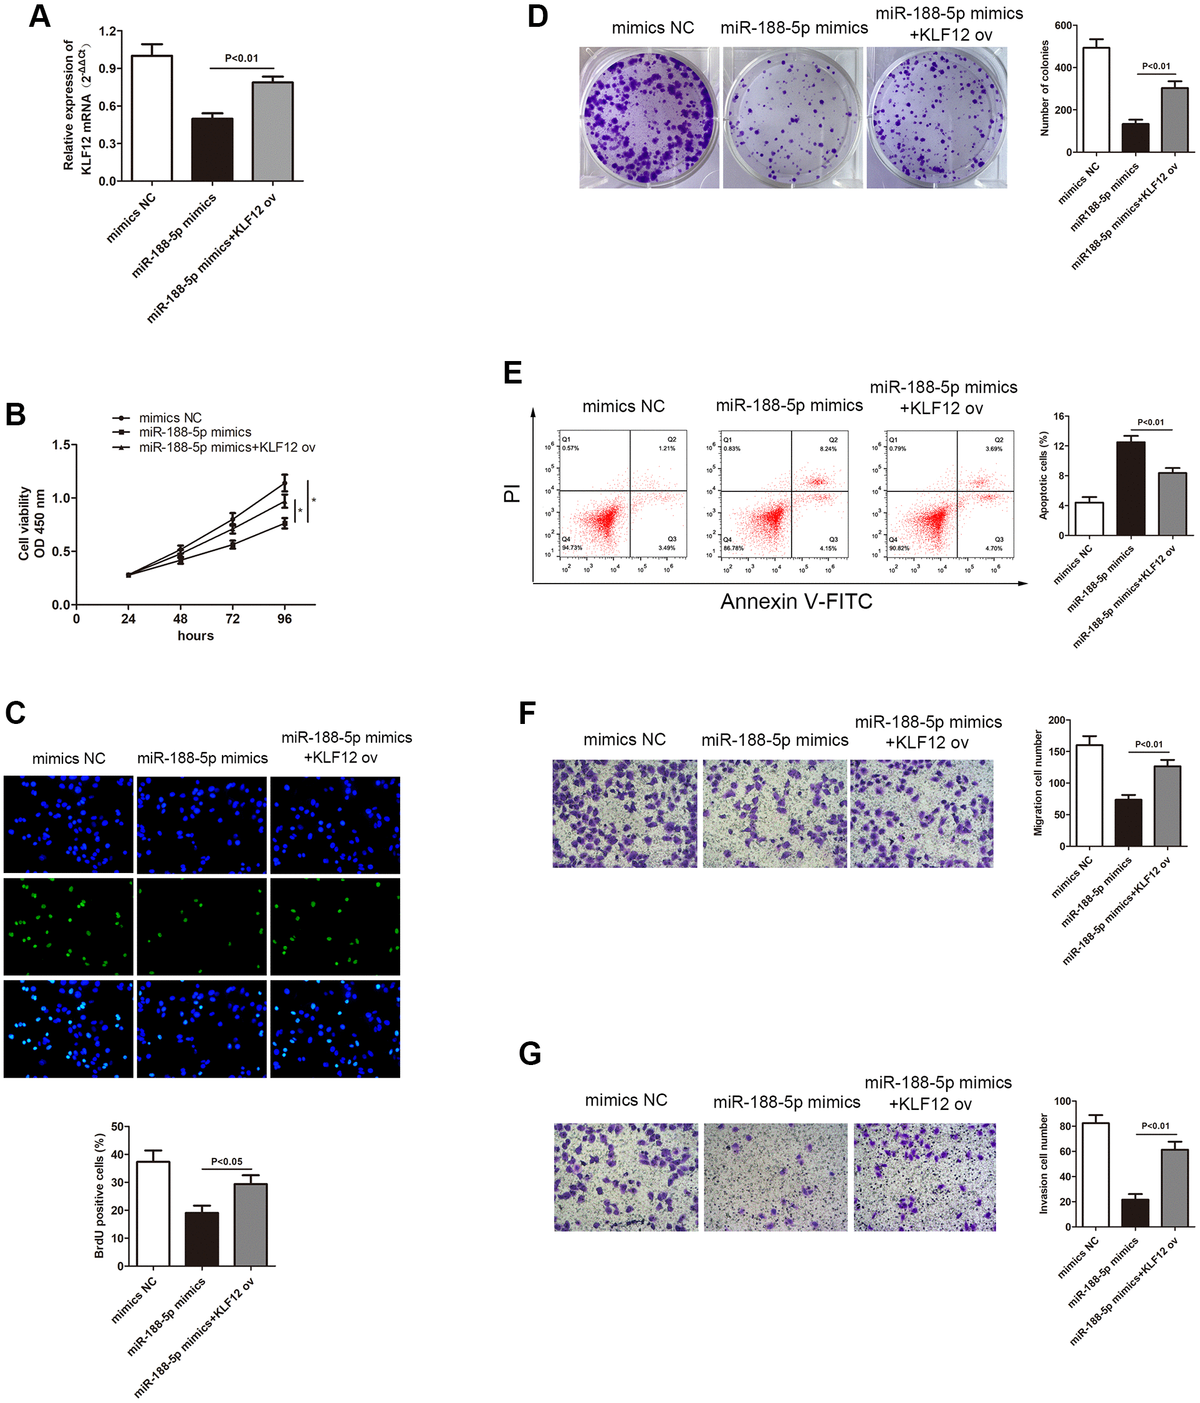 Overexpression of KLF12 promoted LUAD progression. (A) Three groups were transfected using miR-188-5p mimics, miR-188-5p mimics+KLF12 ov, and NC mimics in the A549 cell line. The cell proliferative capacity of the three groups was measured using the (B) CCK-8 (p C) BrdU (*p D) colony formation (p E) Overexpression of KLF12 resulted in a significant reduction in the apoptosis ratio (upper right quadrant+lower right quadrant). The transwell chamber results indicated that overexpression of KLF12 significantly promoted cell (F) migration (p G) invasion (p 